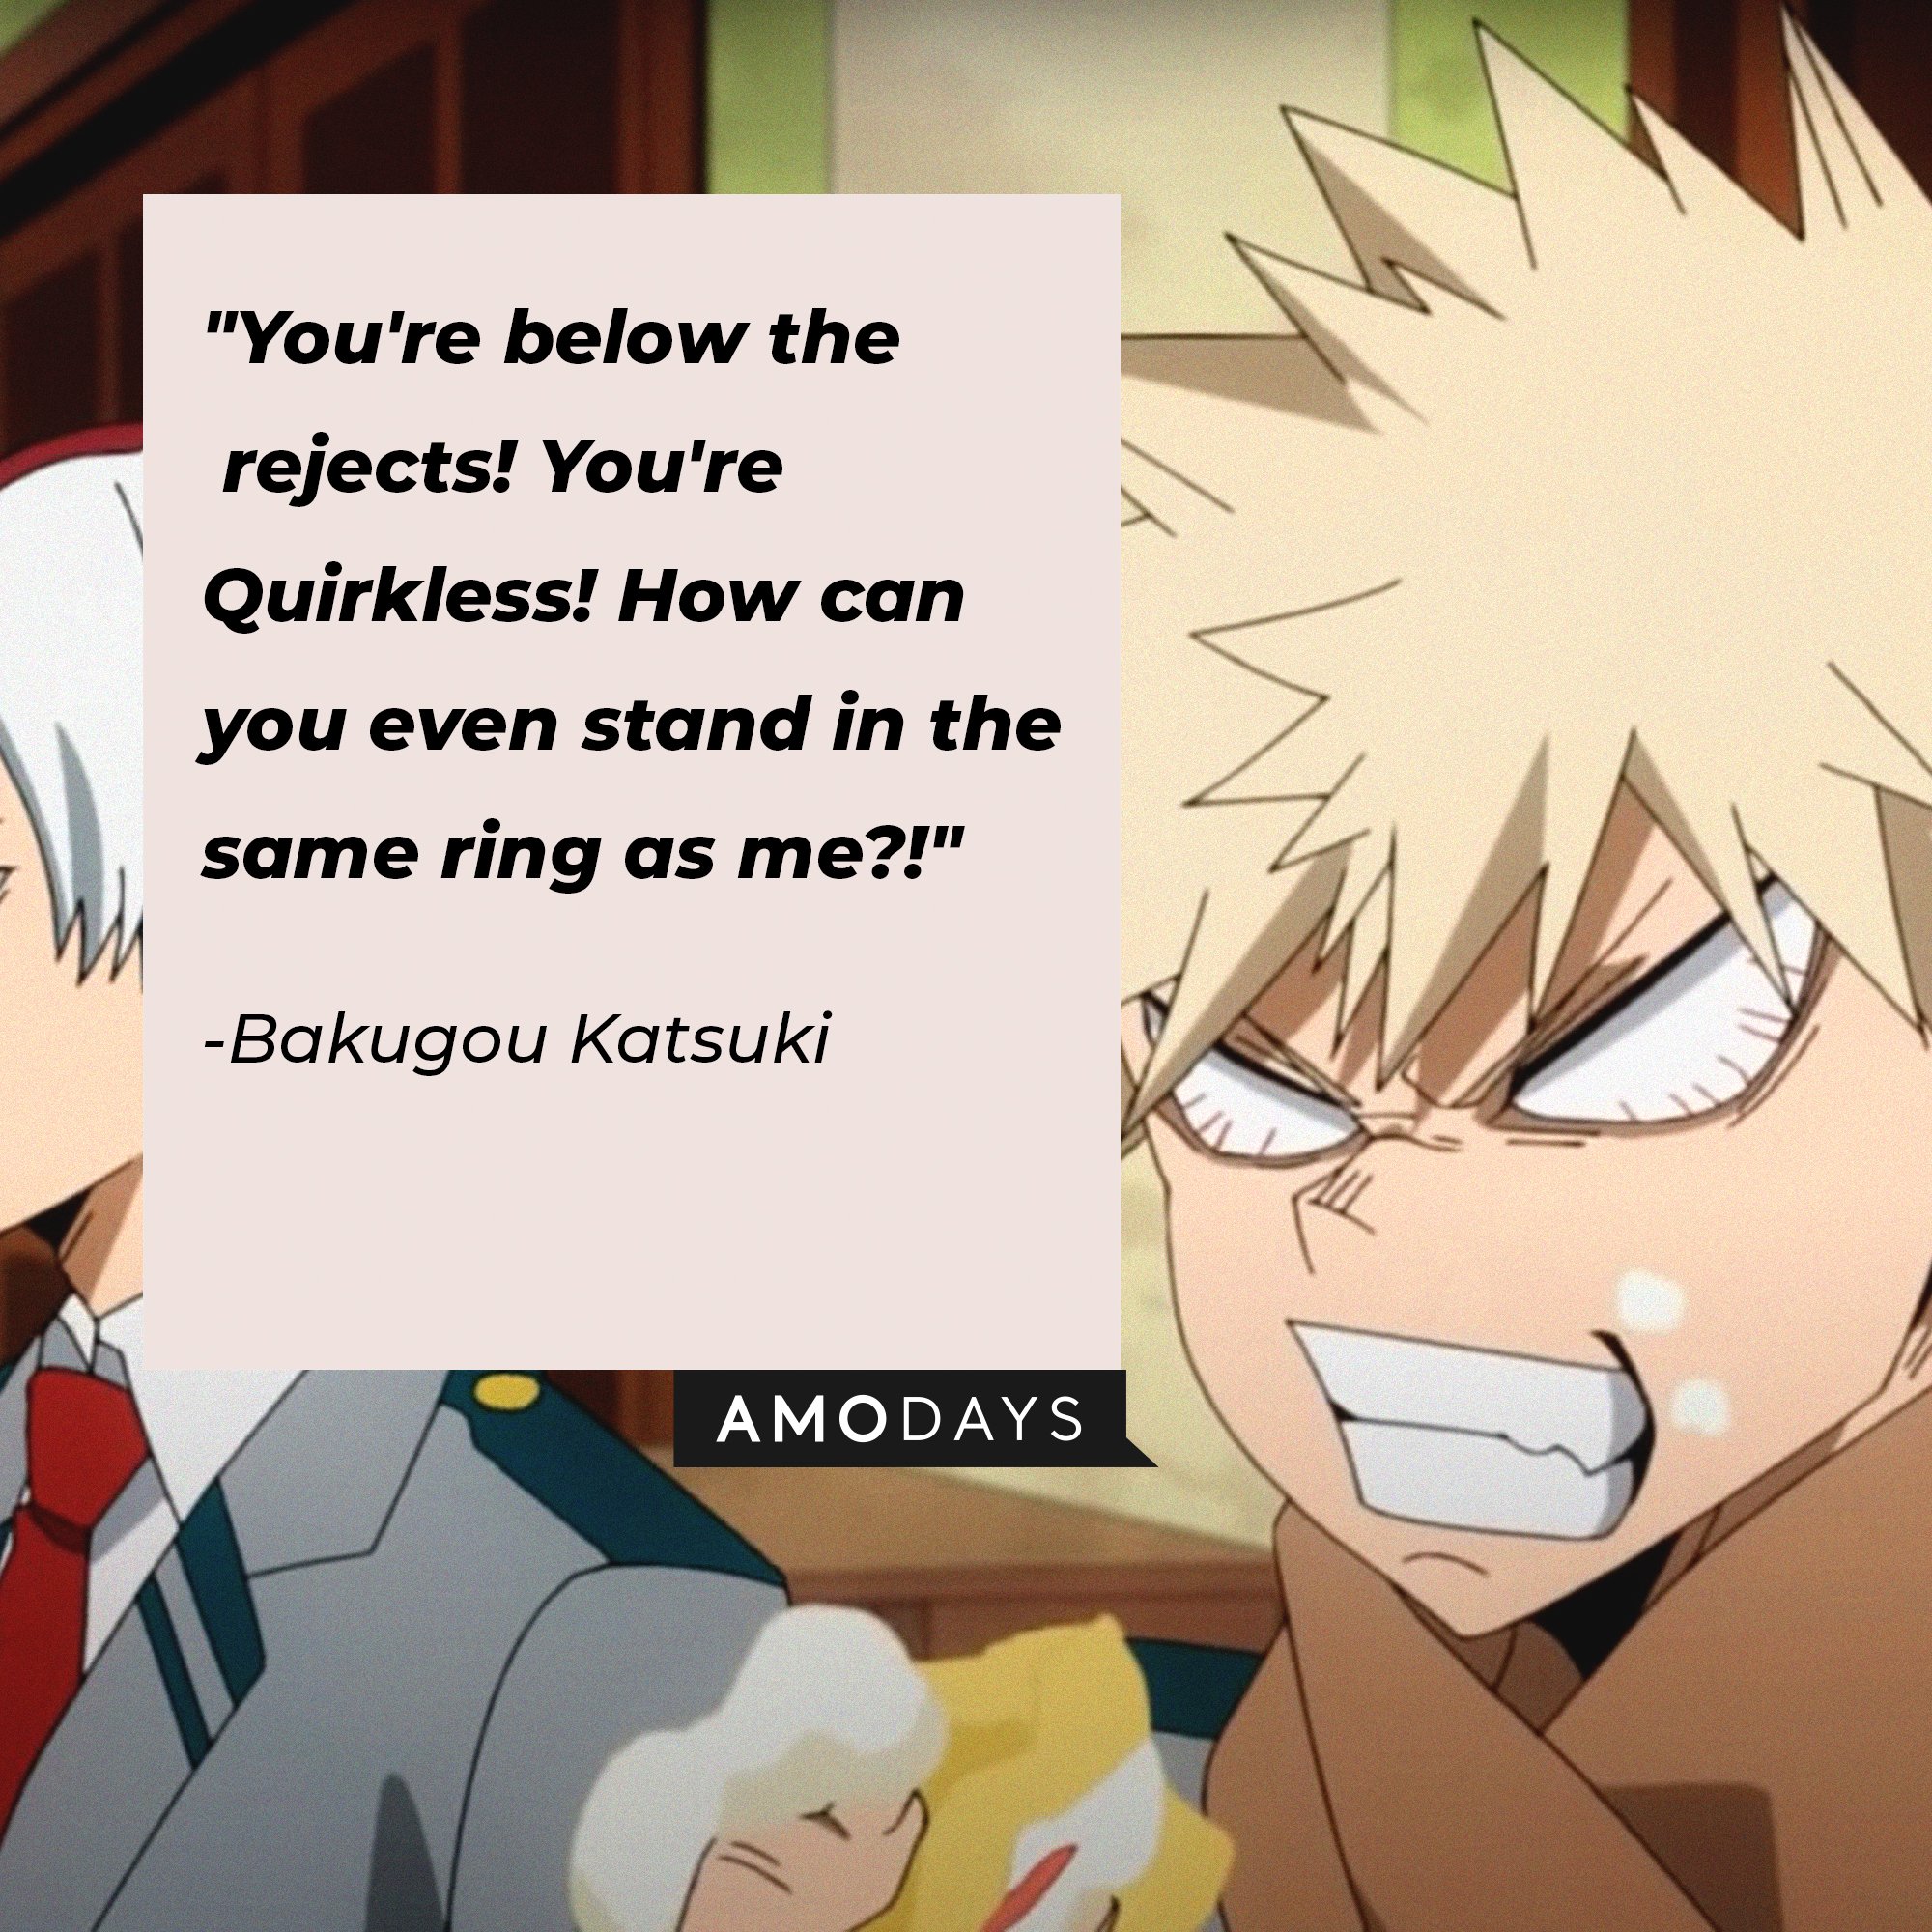 Bakugou Katsuki’s quote: "You're below the rejects! You're Quirkless! How can you even stand in the same ring as me?!" | Image: AmoDays